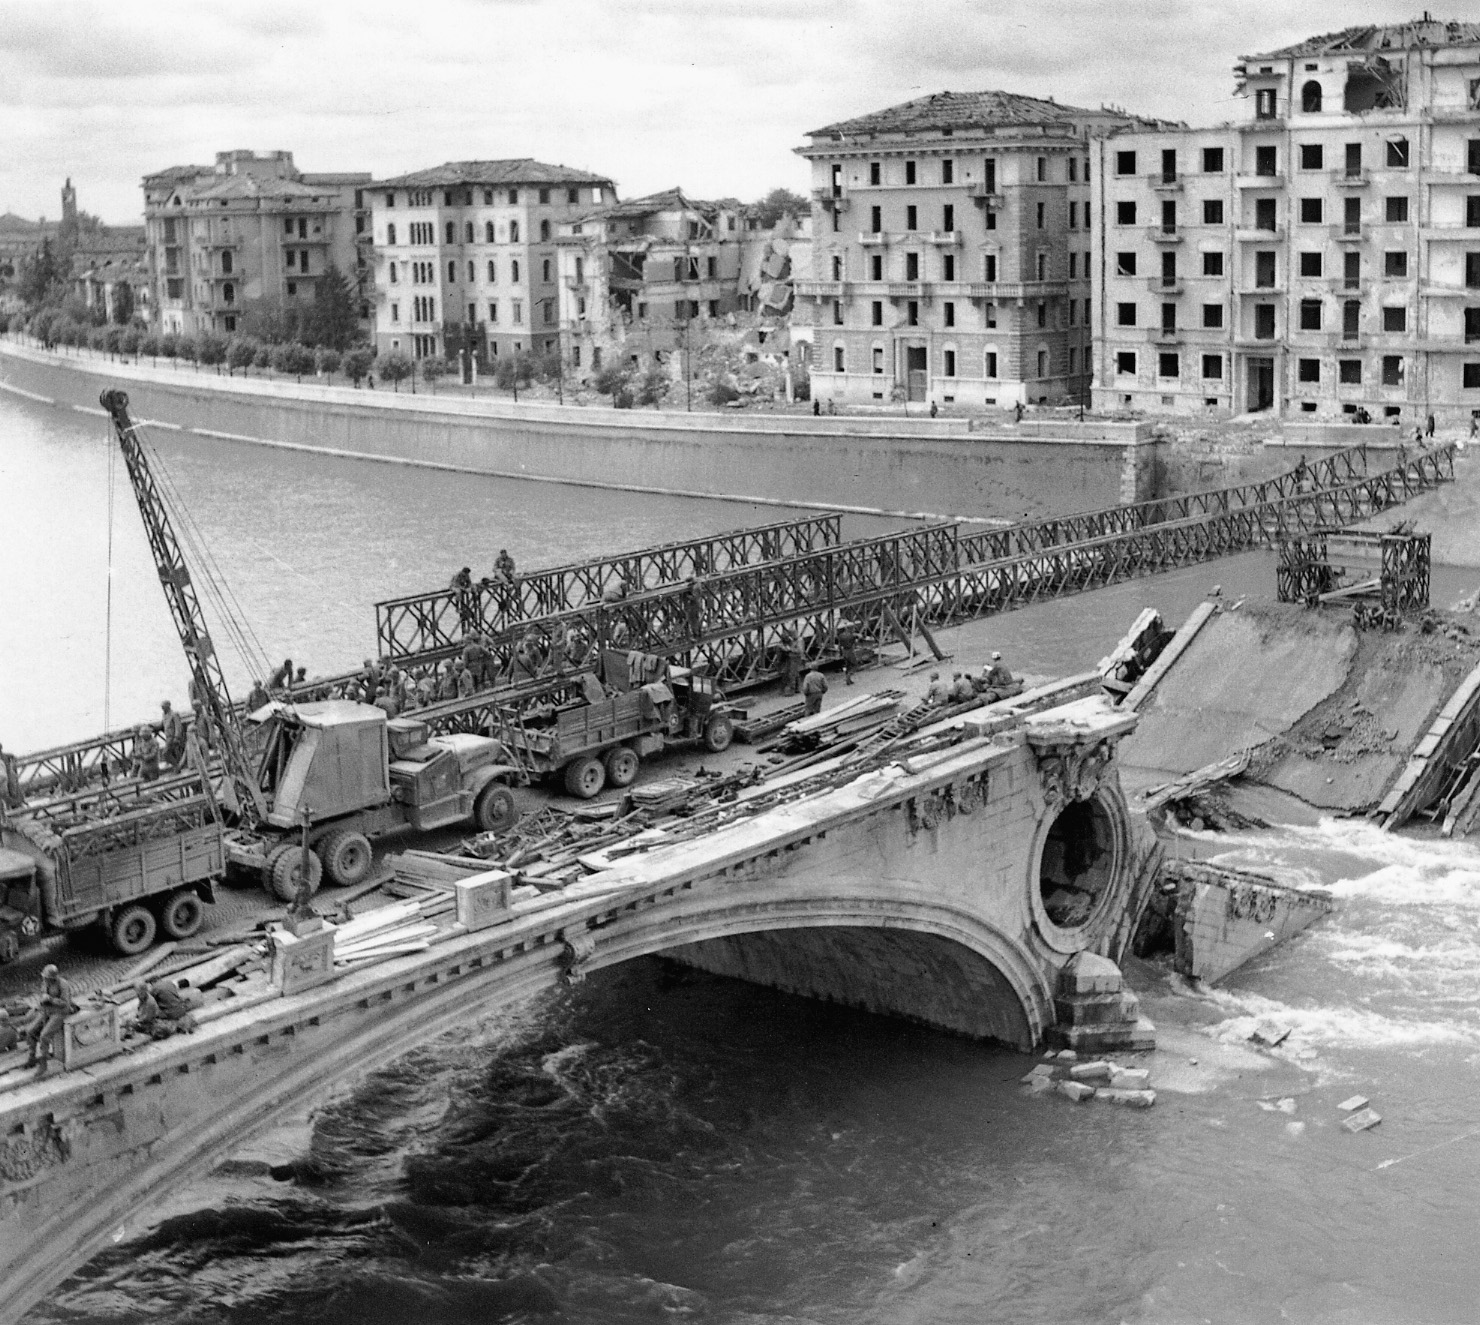 A Bailey bridge is used to re-connect sections of a damaged stone bridge over the River Po in 1945.